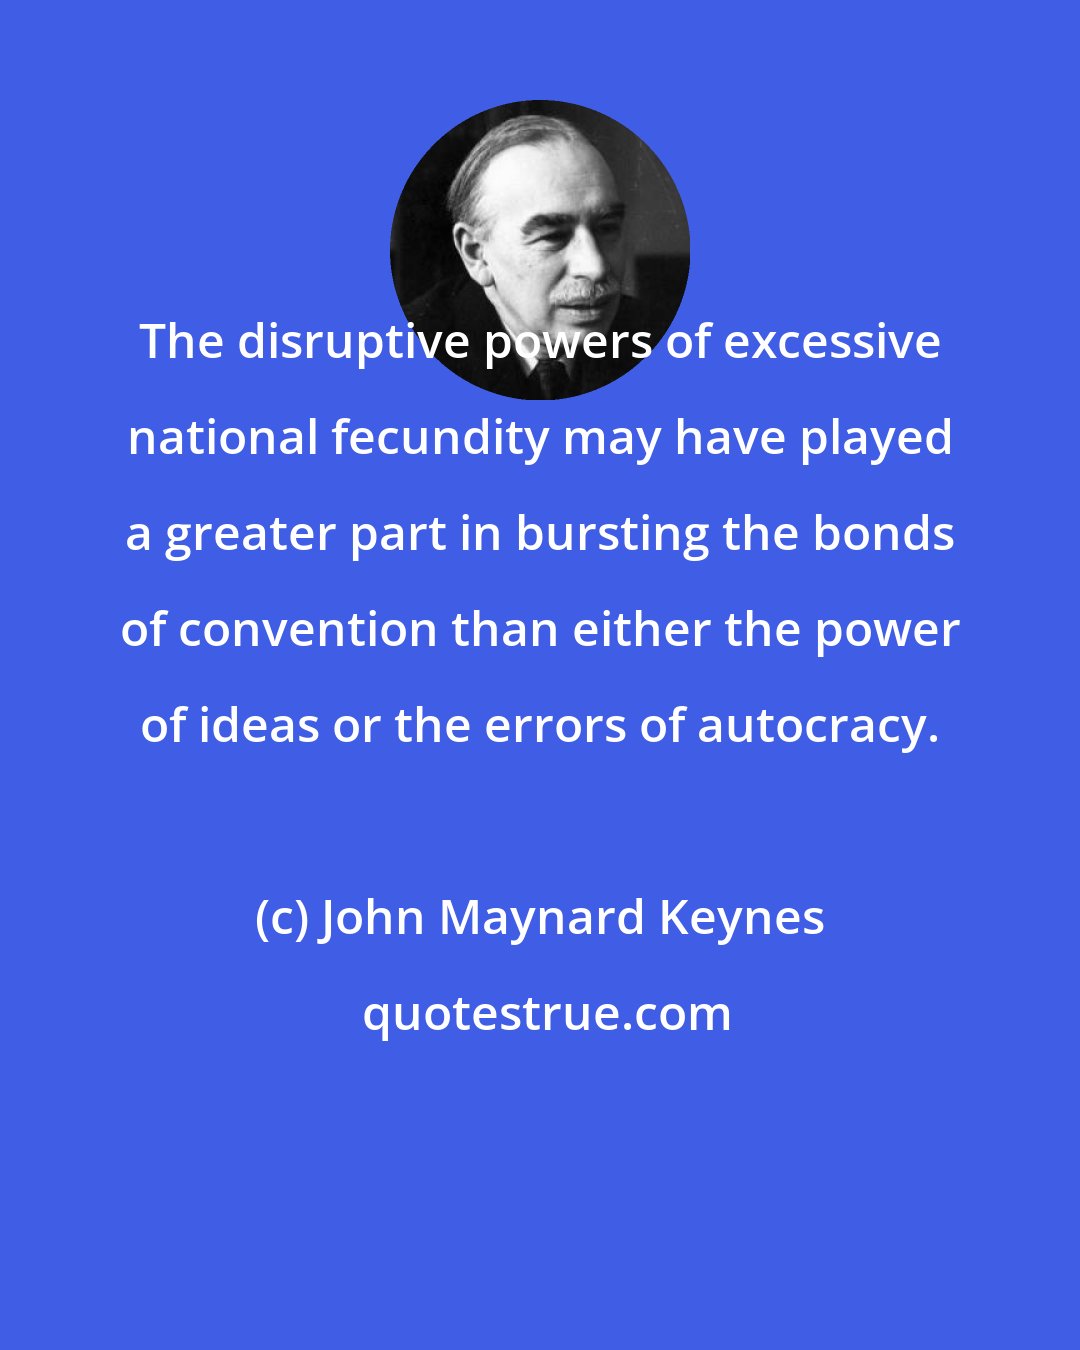 John Maynard Keynes: The disruptive powers of excessive national fecundity may have played a greater part in bursting the bonds of convention than either the power of ideas or the errors of autocracy.